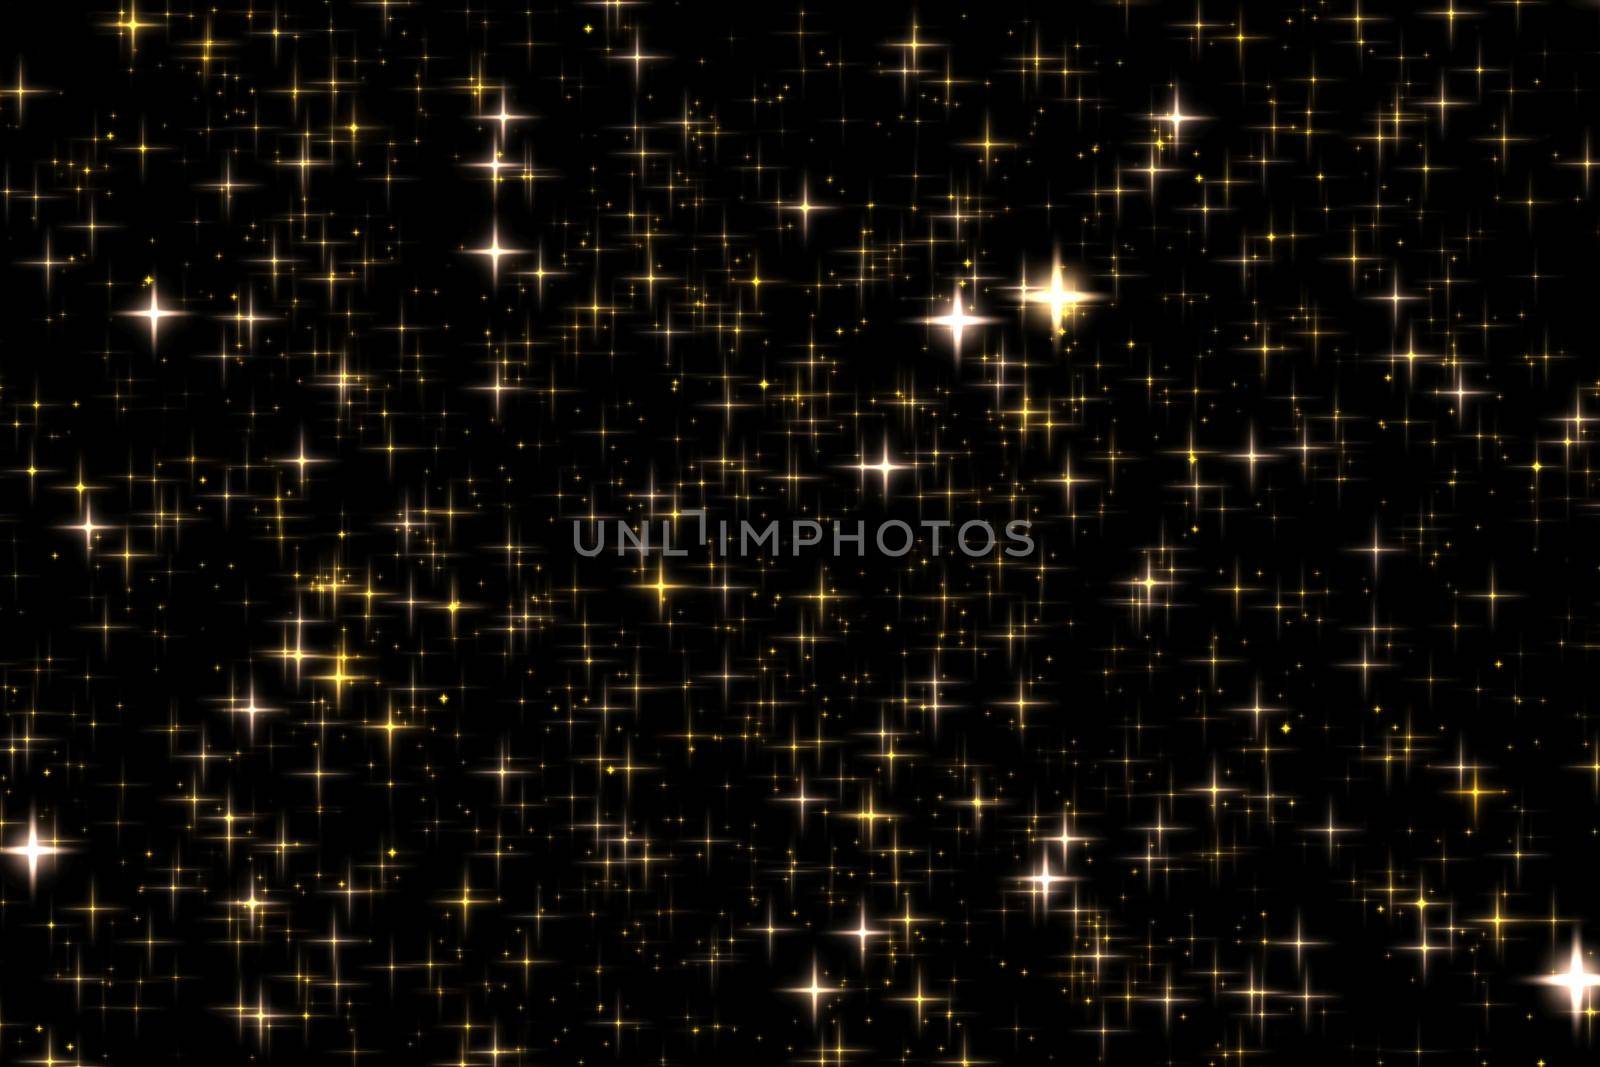 Golden holiday glitter and sparkling overlay, stars and magic glow texture on black background, gold star dust particles for luxury and glamour designs